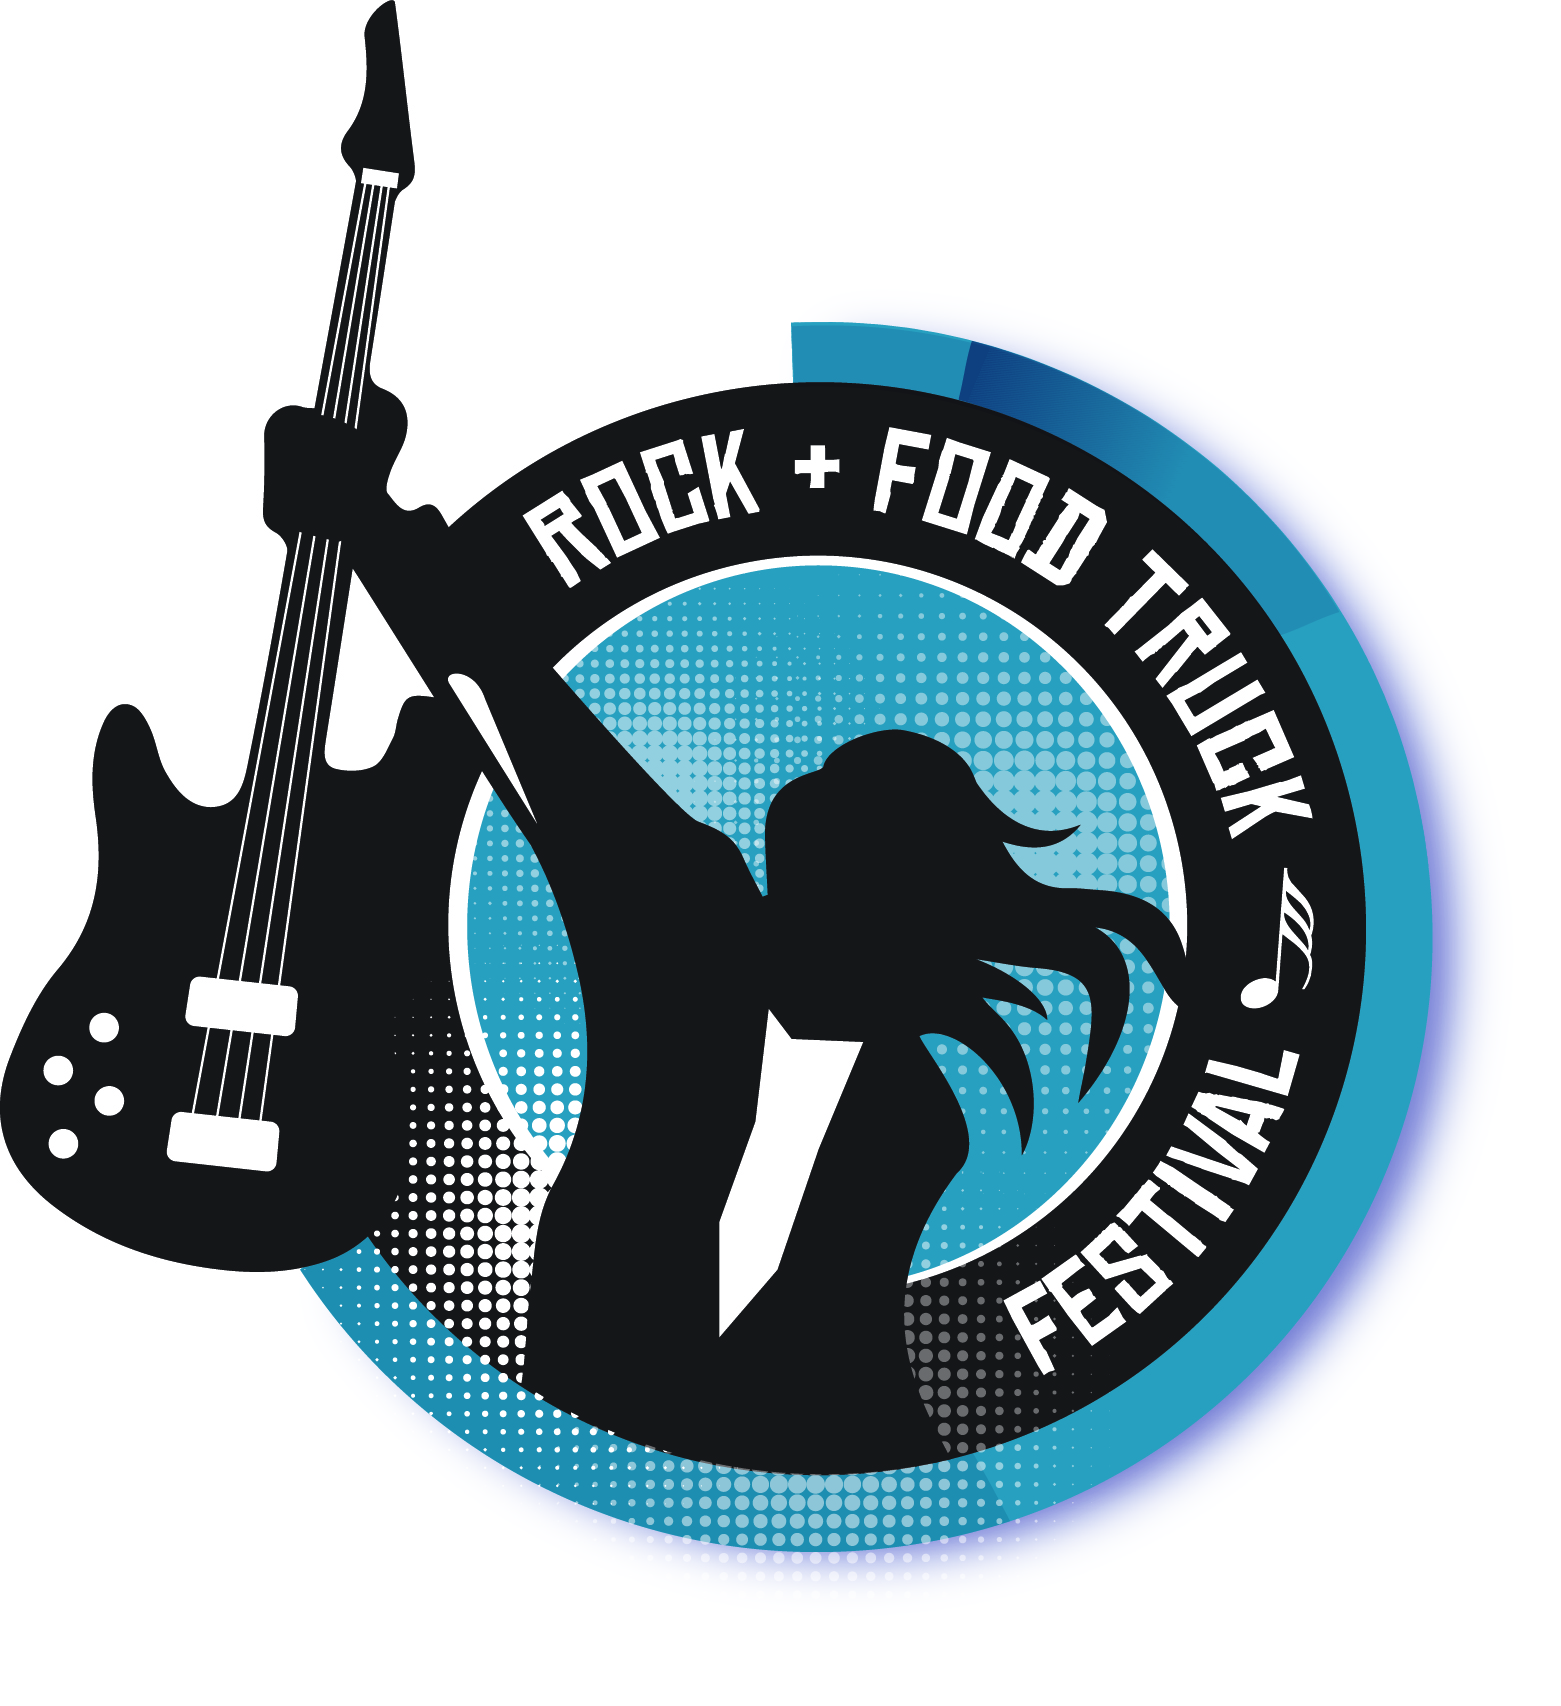 CoreFirst Bank and Trust Rock and Food Truck Festival